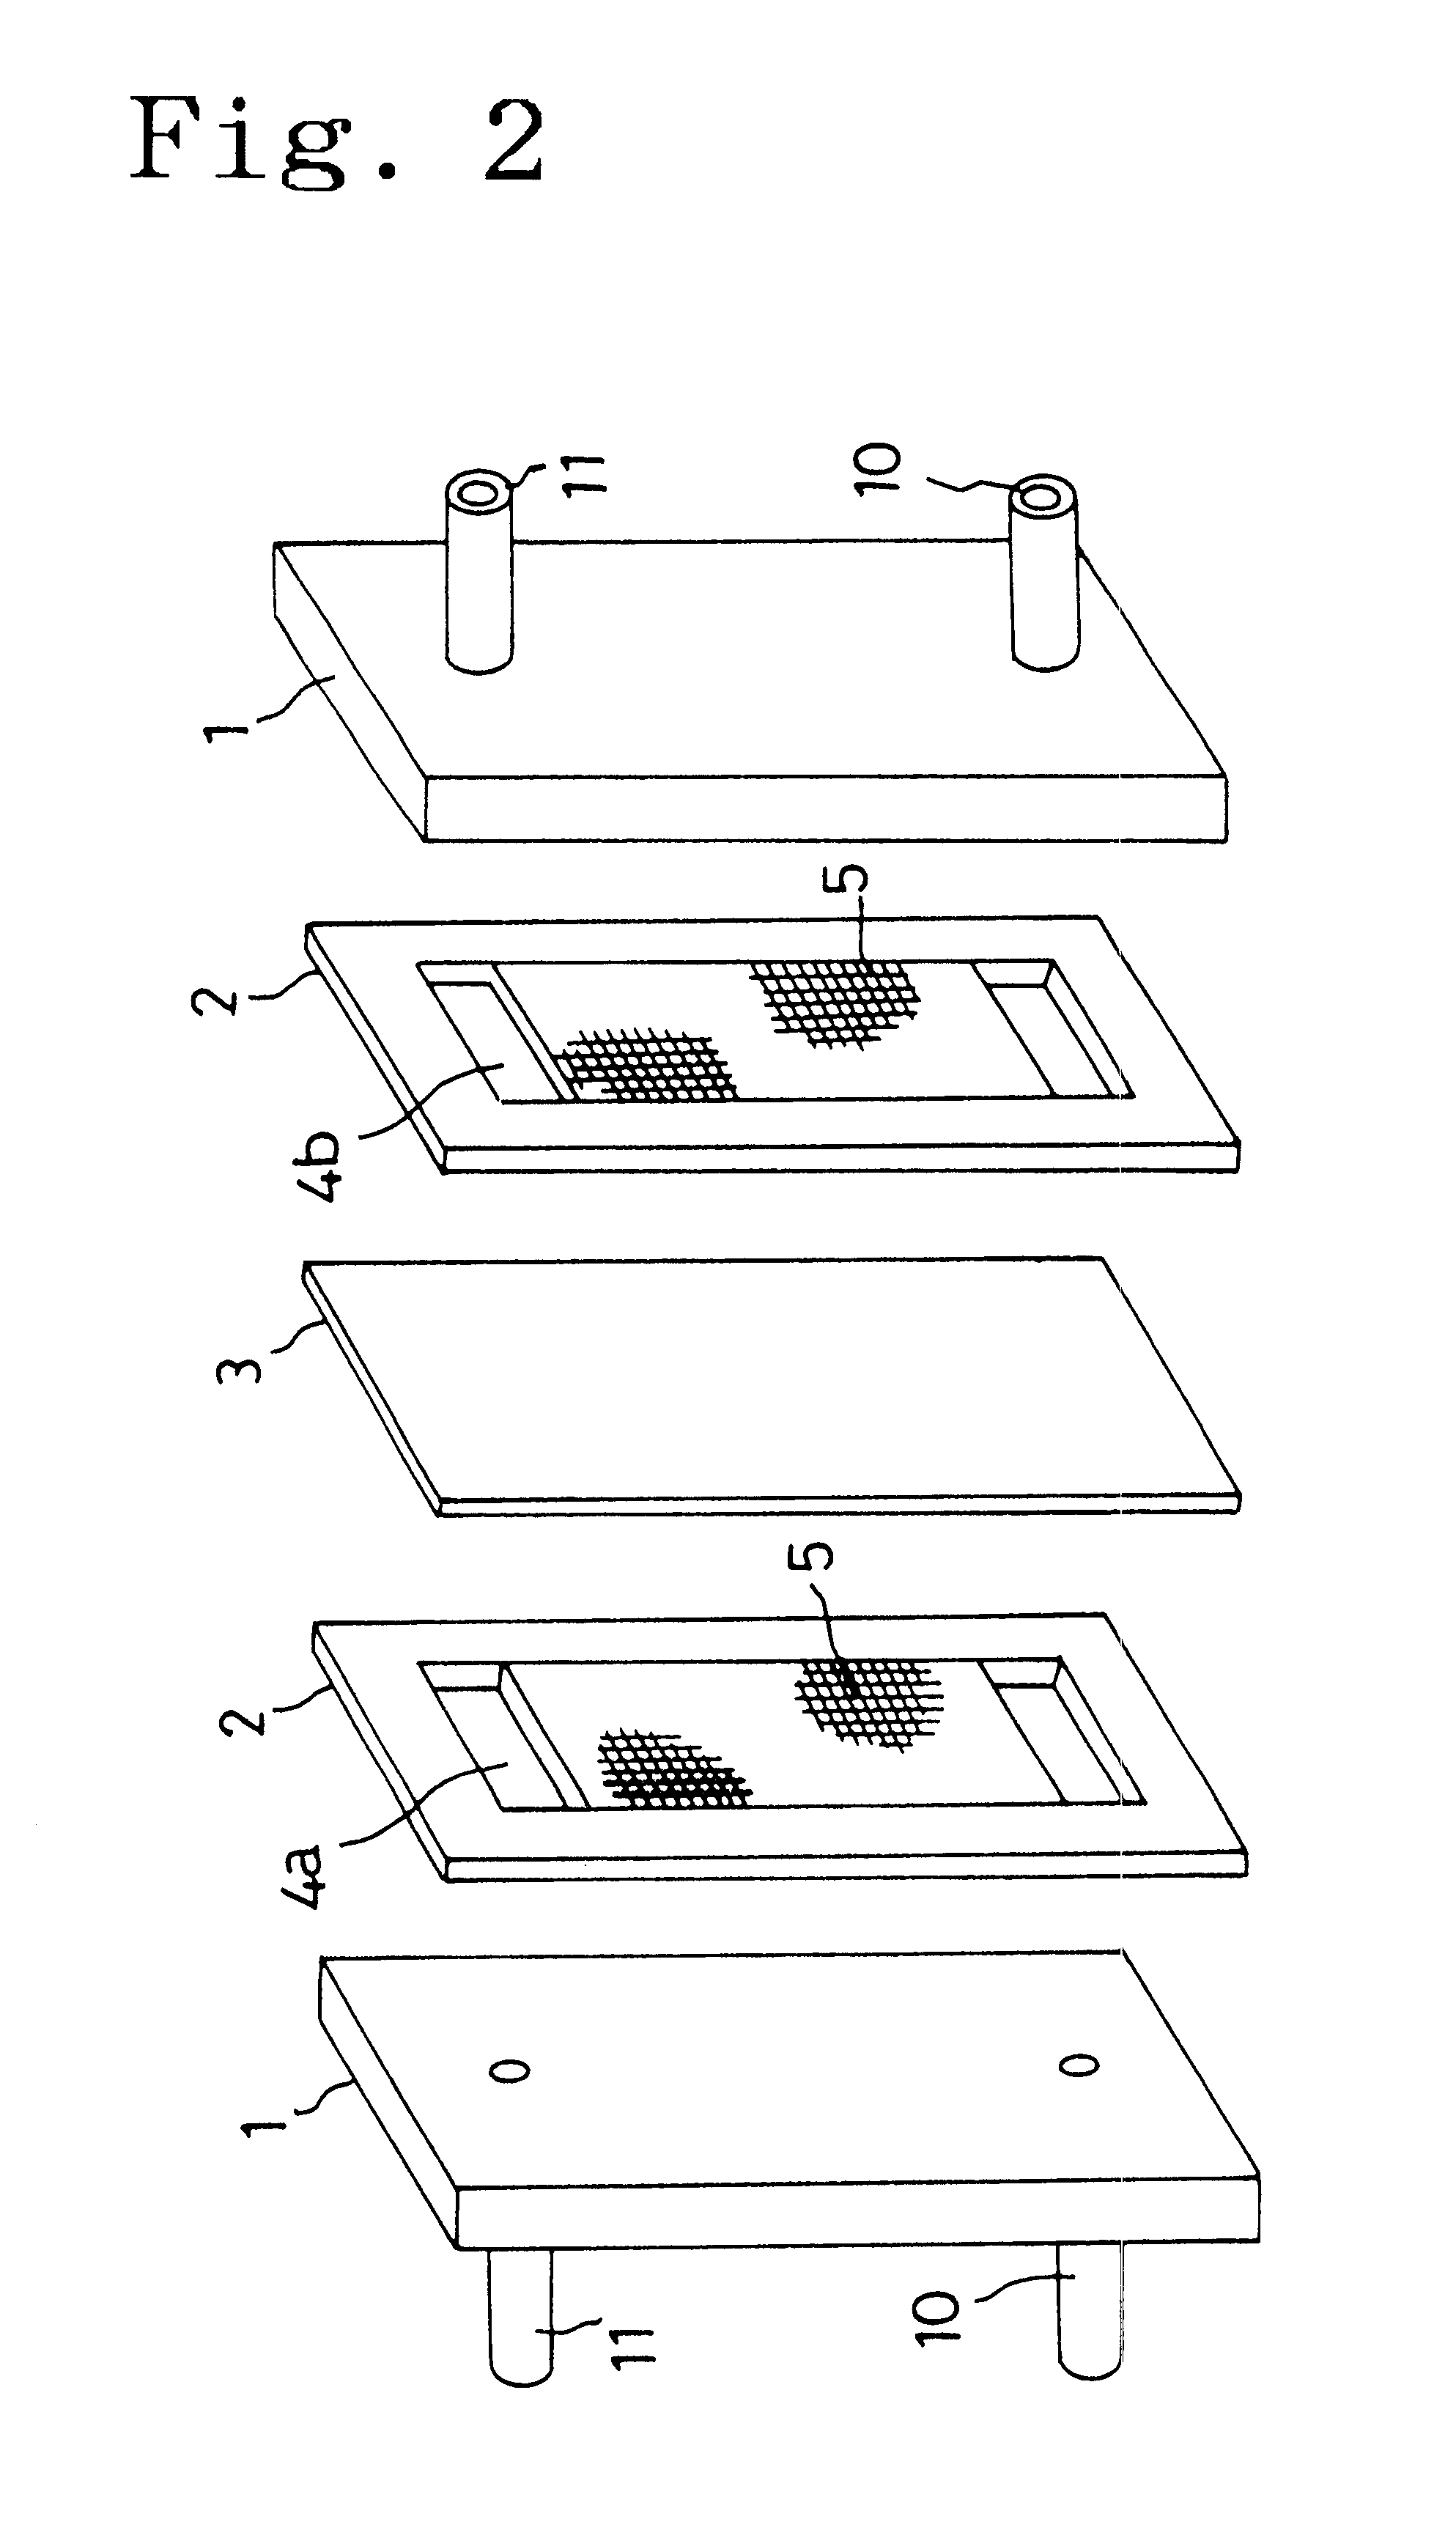 Carbon electrode material for a vanadium-based redox-flow battery